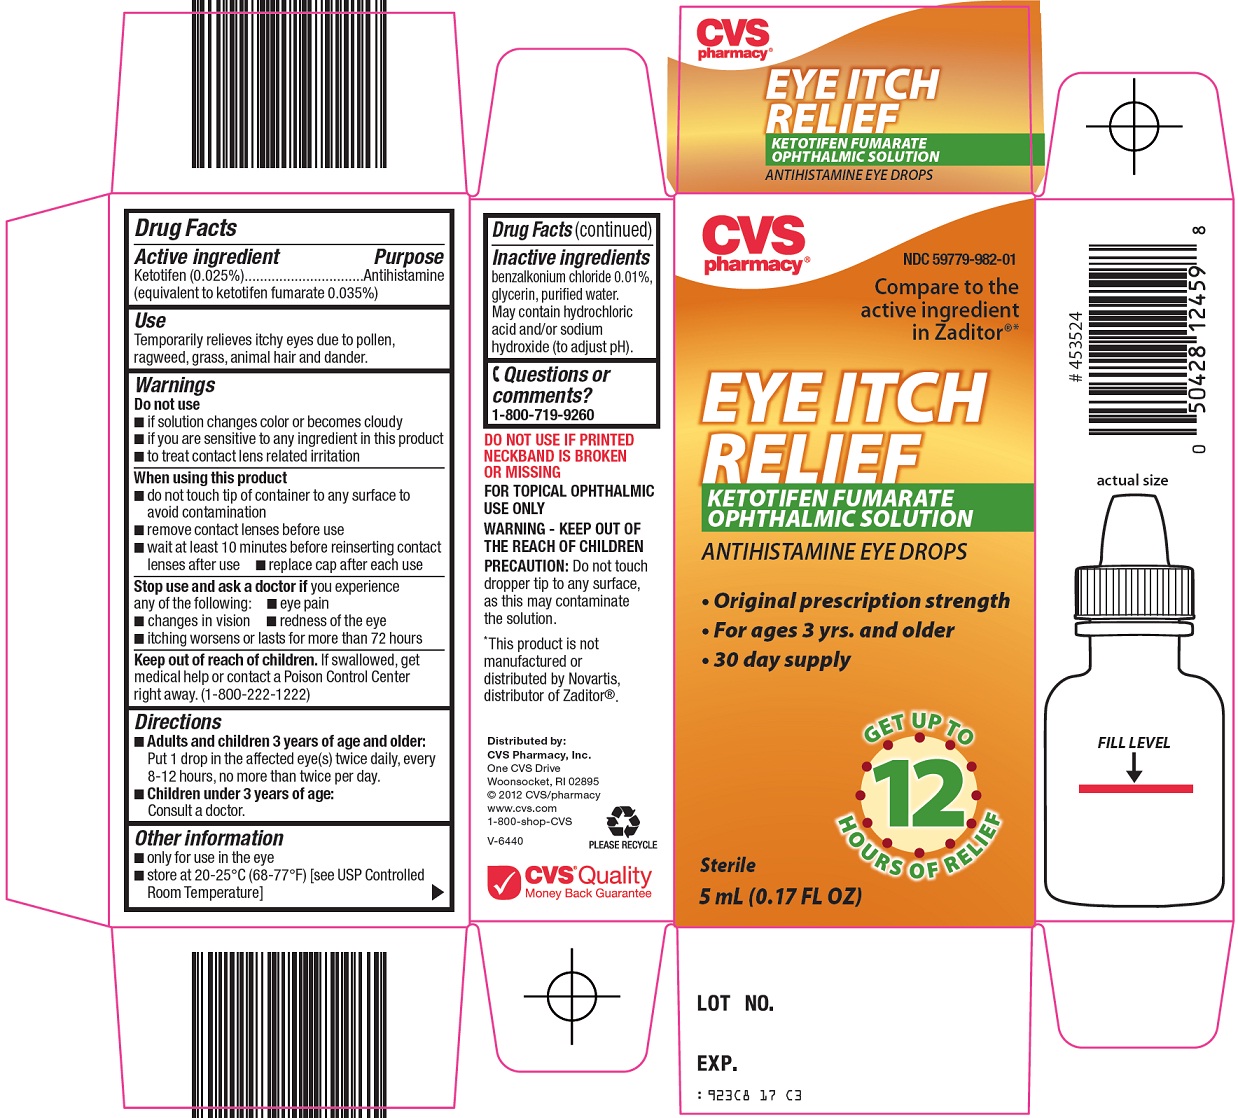 Eye Itch Relief Carton Image